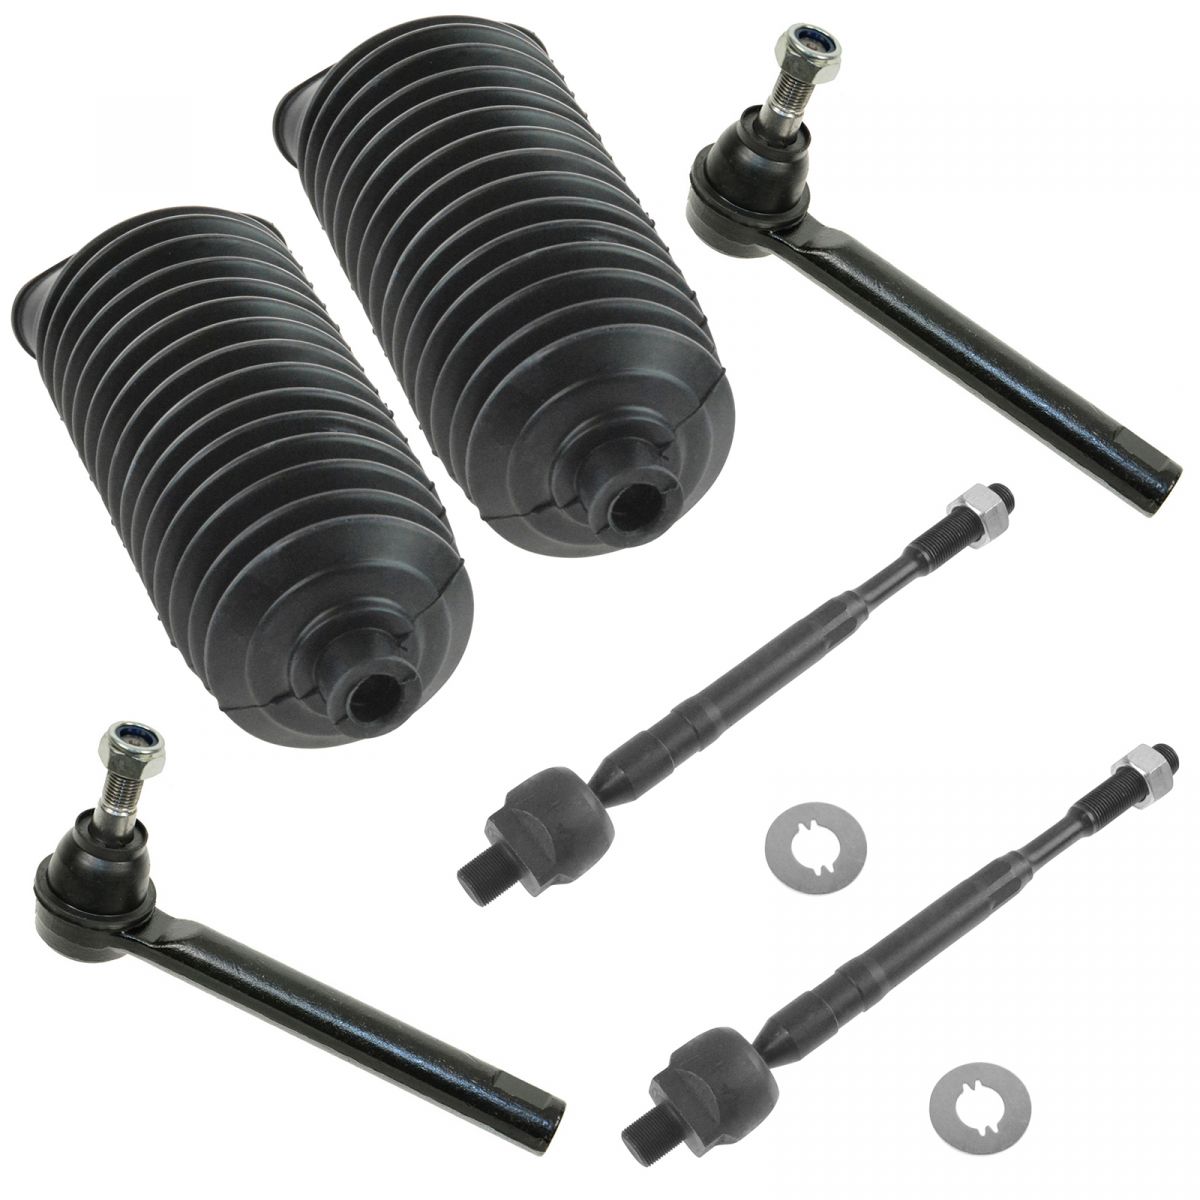 Inner and Outer Tie Rod End Rack /& Pinion Bellow Boots PartsW 6 Pc Steering Kit for Dodge Ram 1500 and Ram 1500